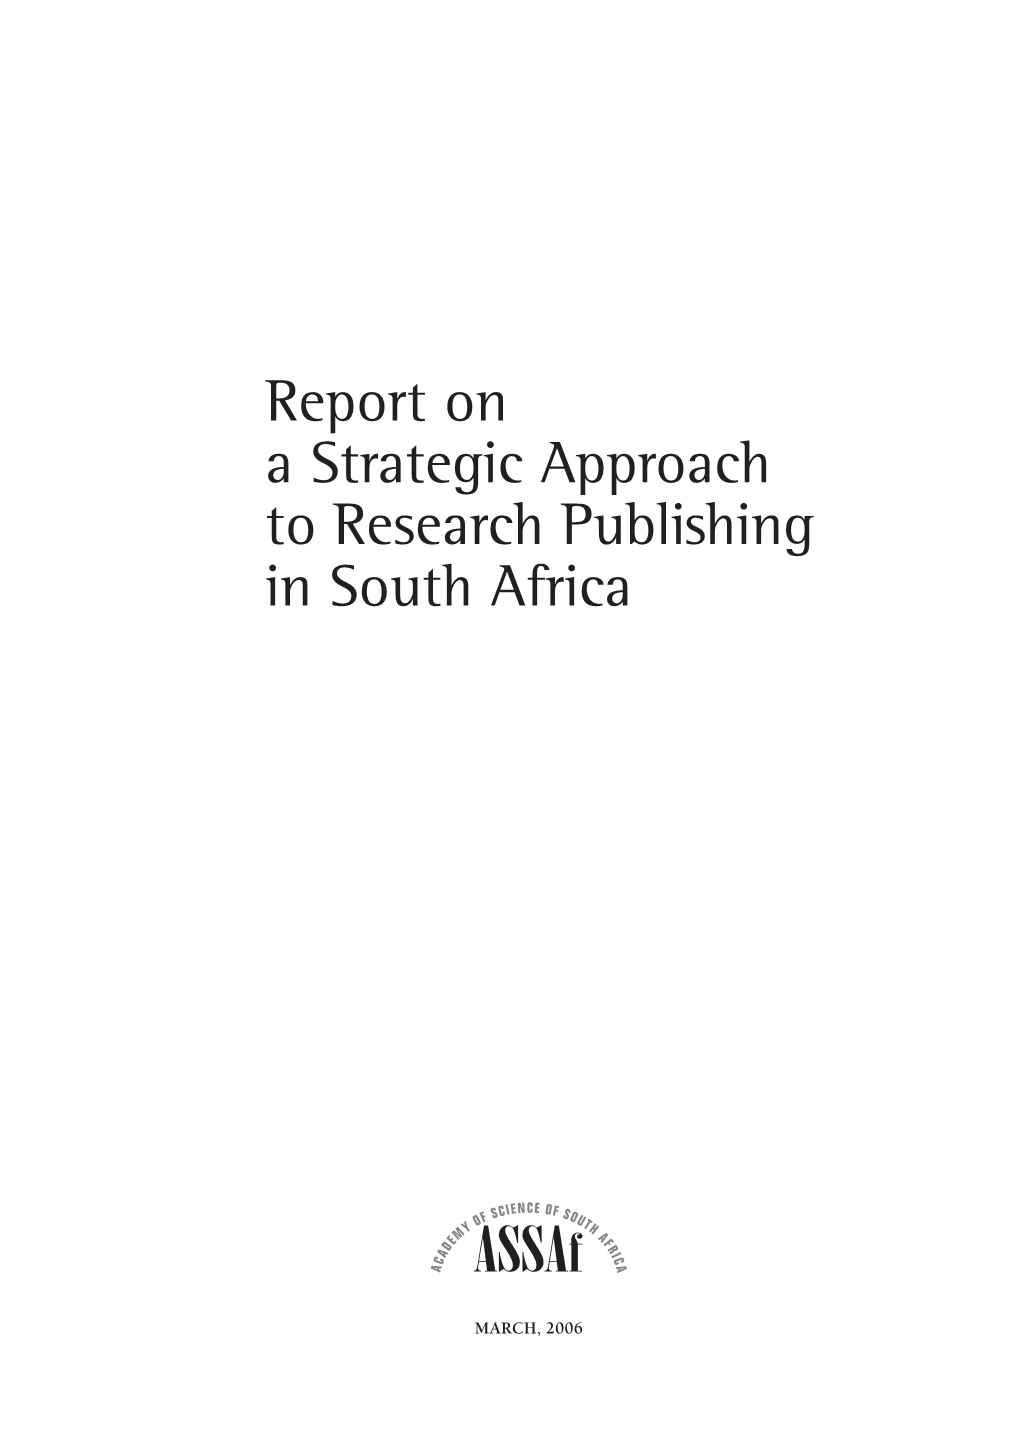 A Strategic Approach to Research Publishing in South Africa